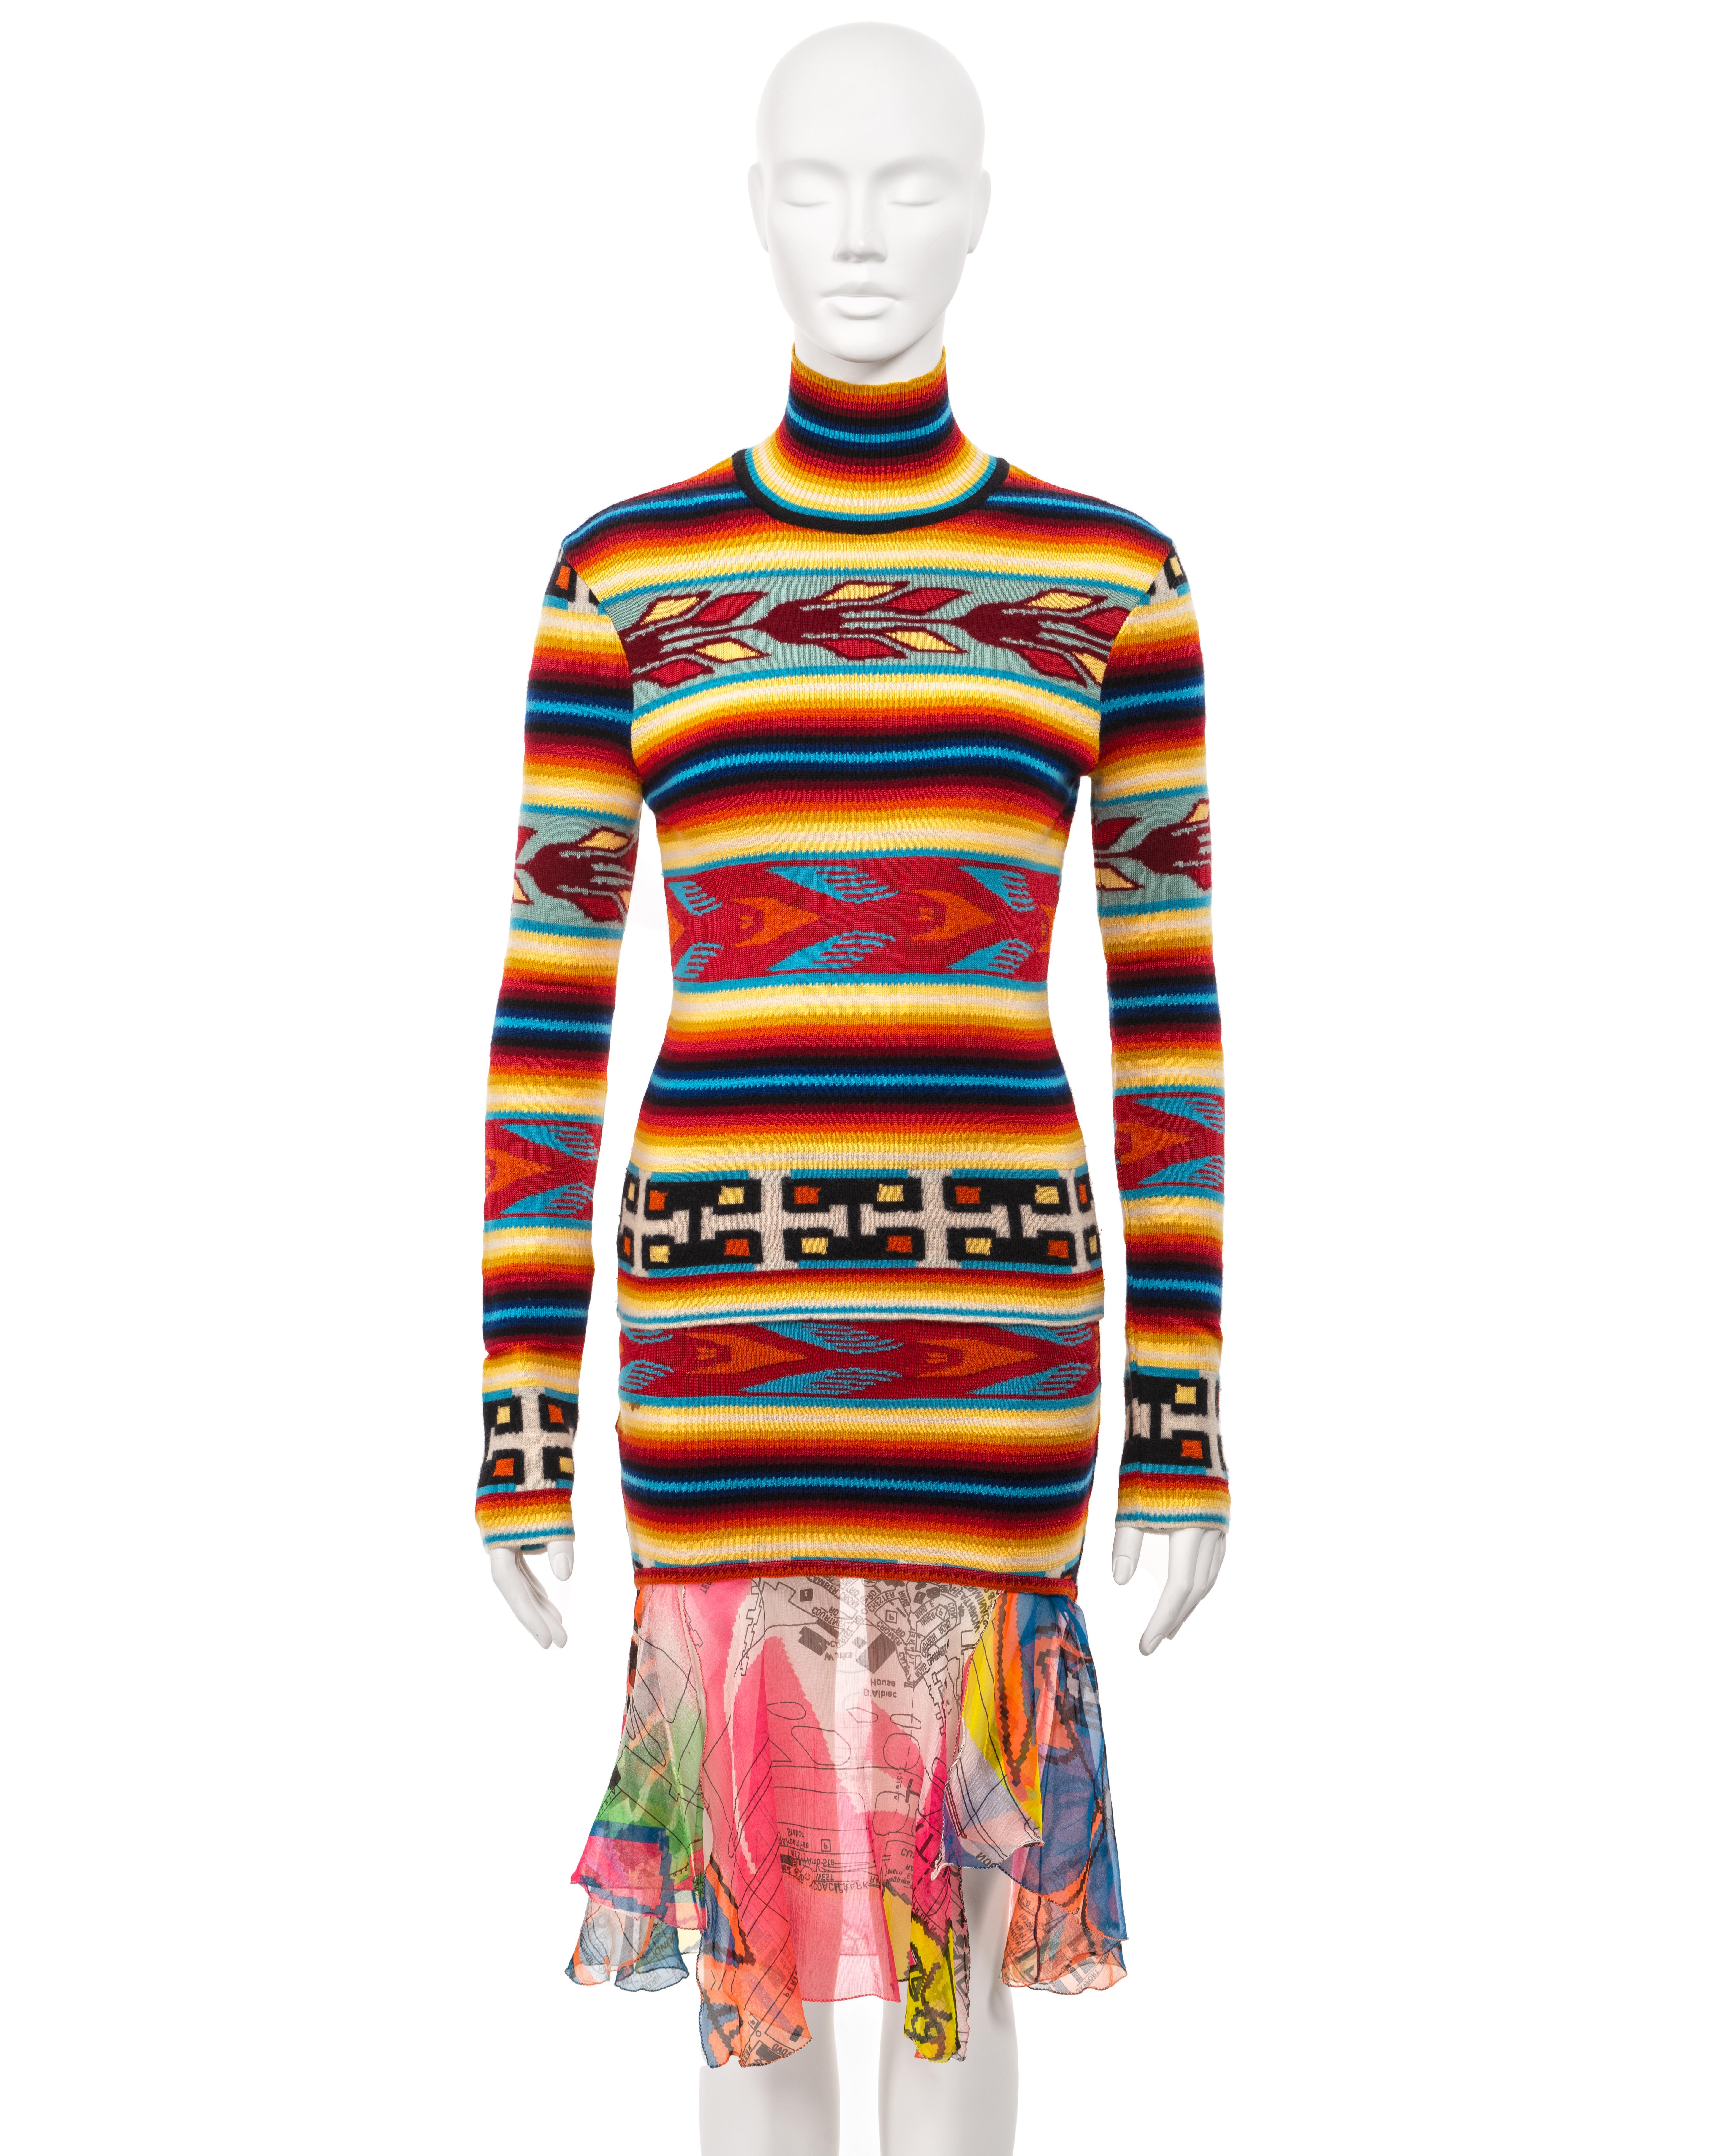 Women's Christian Dior by John Galliano colourful striped knitted 3 piece set, fw 2001